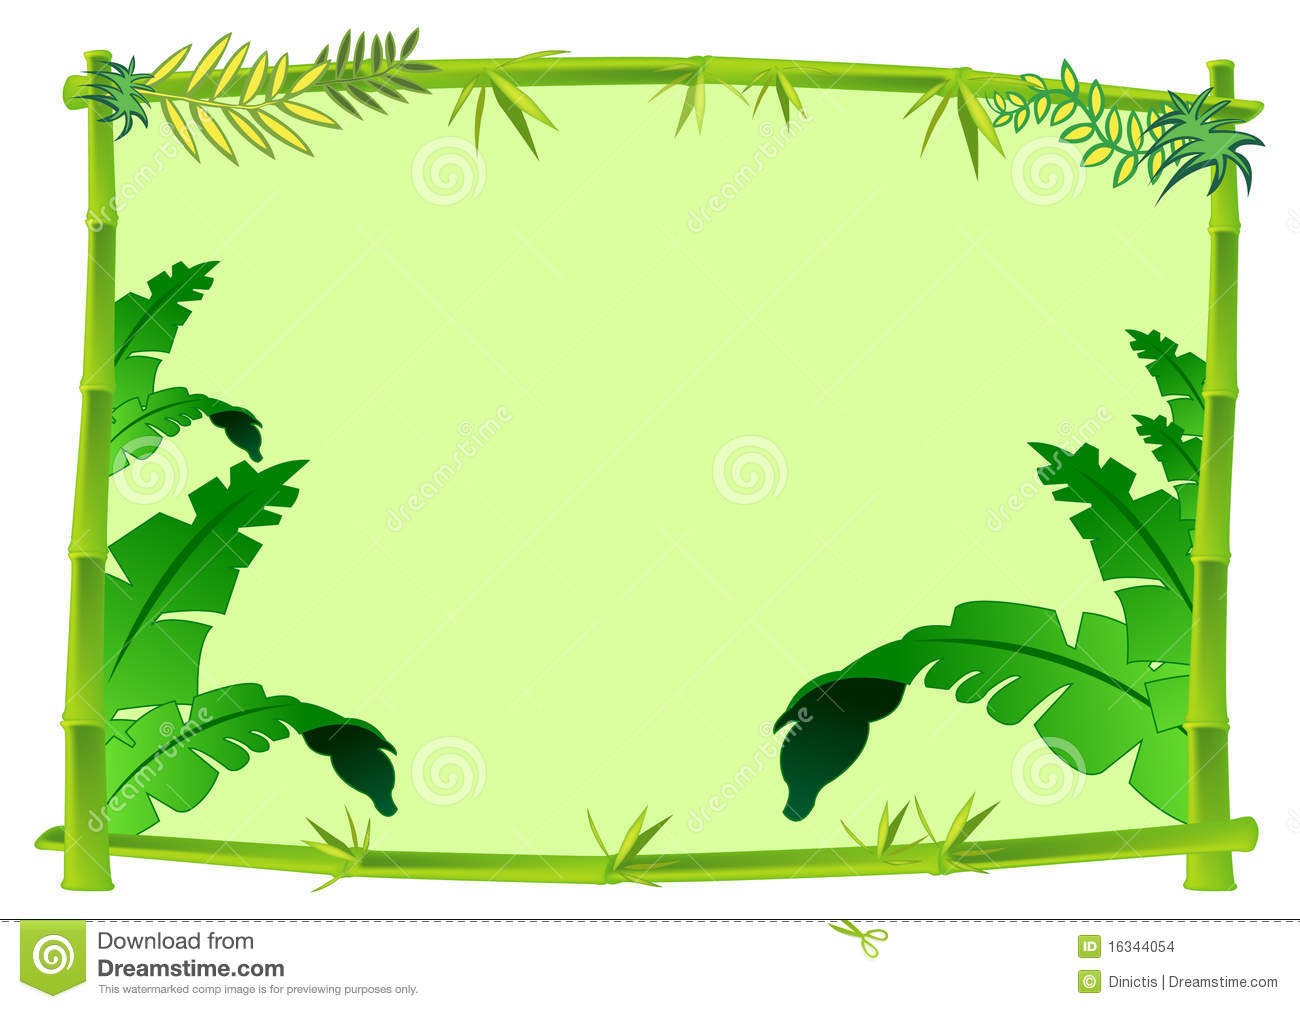 Bamboo And Jungle Frame Concept Illustration Stock Images   Image